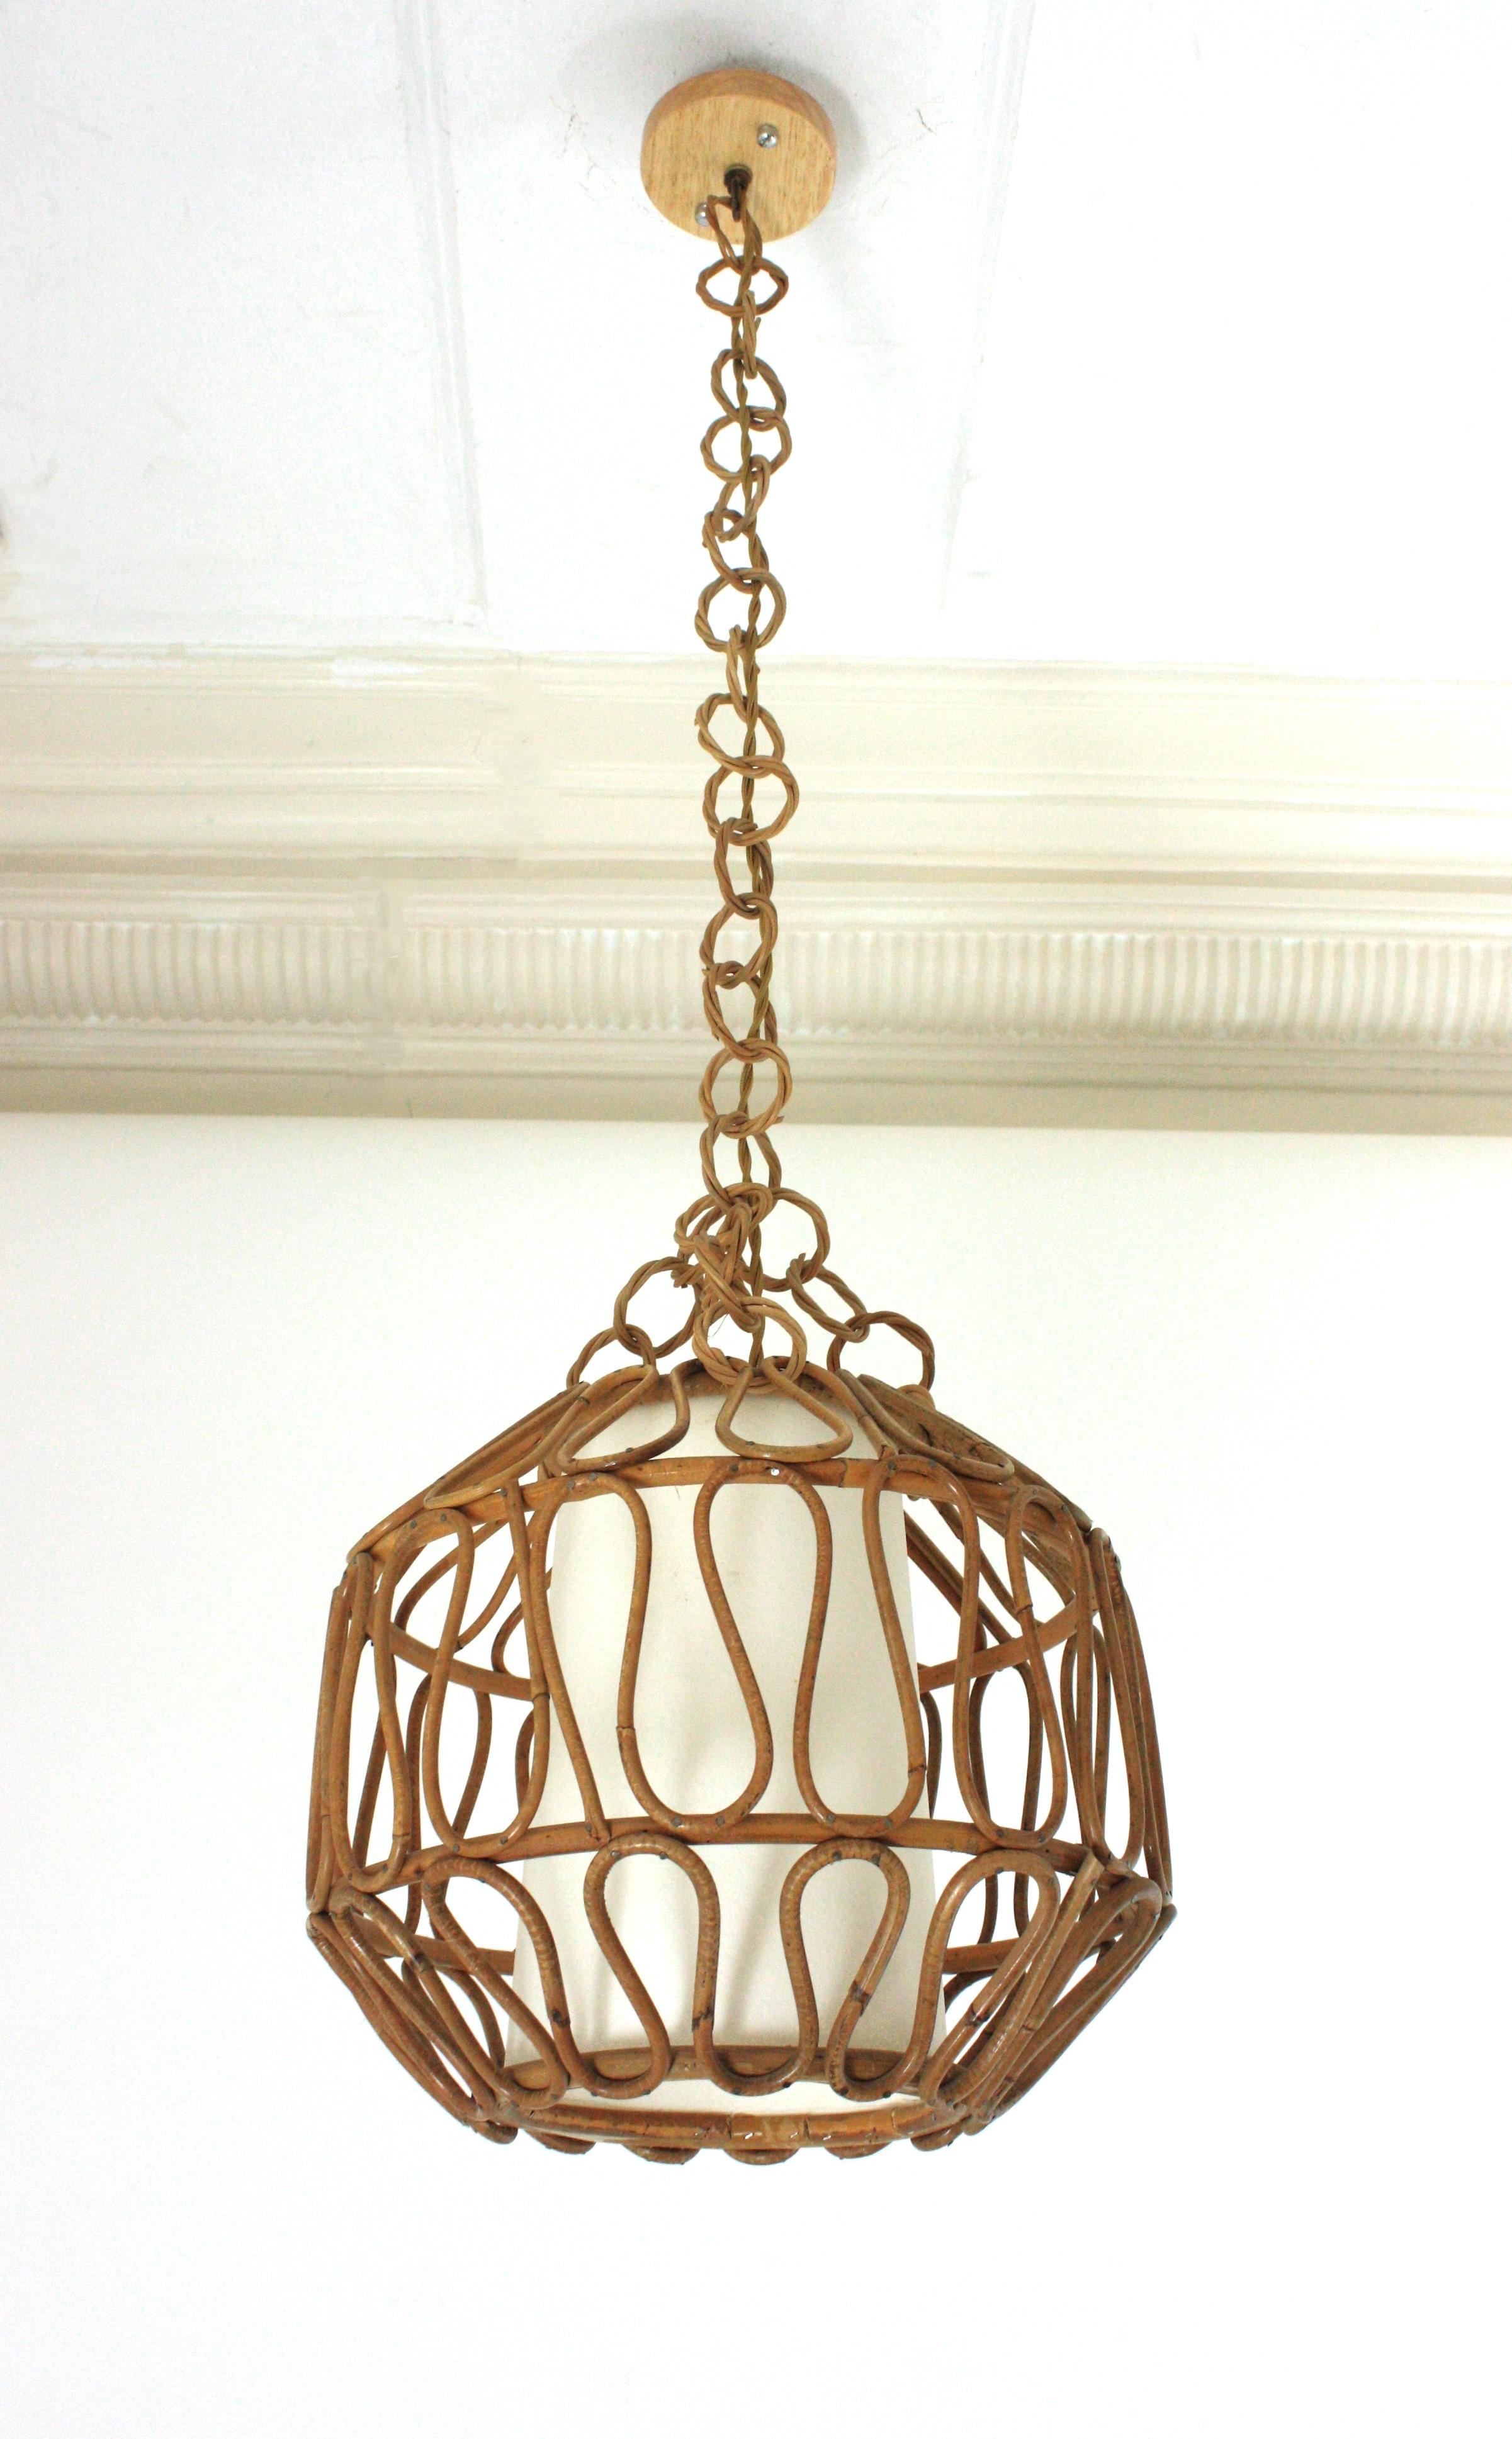 Mid-Century Modern rattan ball shaped lantern or pendant ceiling lamp. Spain, 1950s-1960s.
This suspension features a lampshade made of rattan canes with rattan undulating loop decorations, design in the manner of Franco Albini. It has an inner